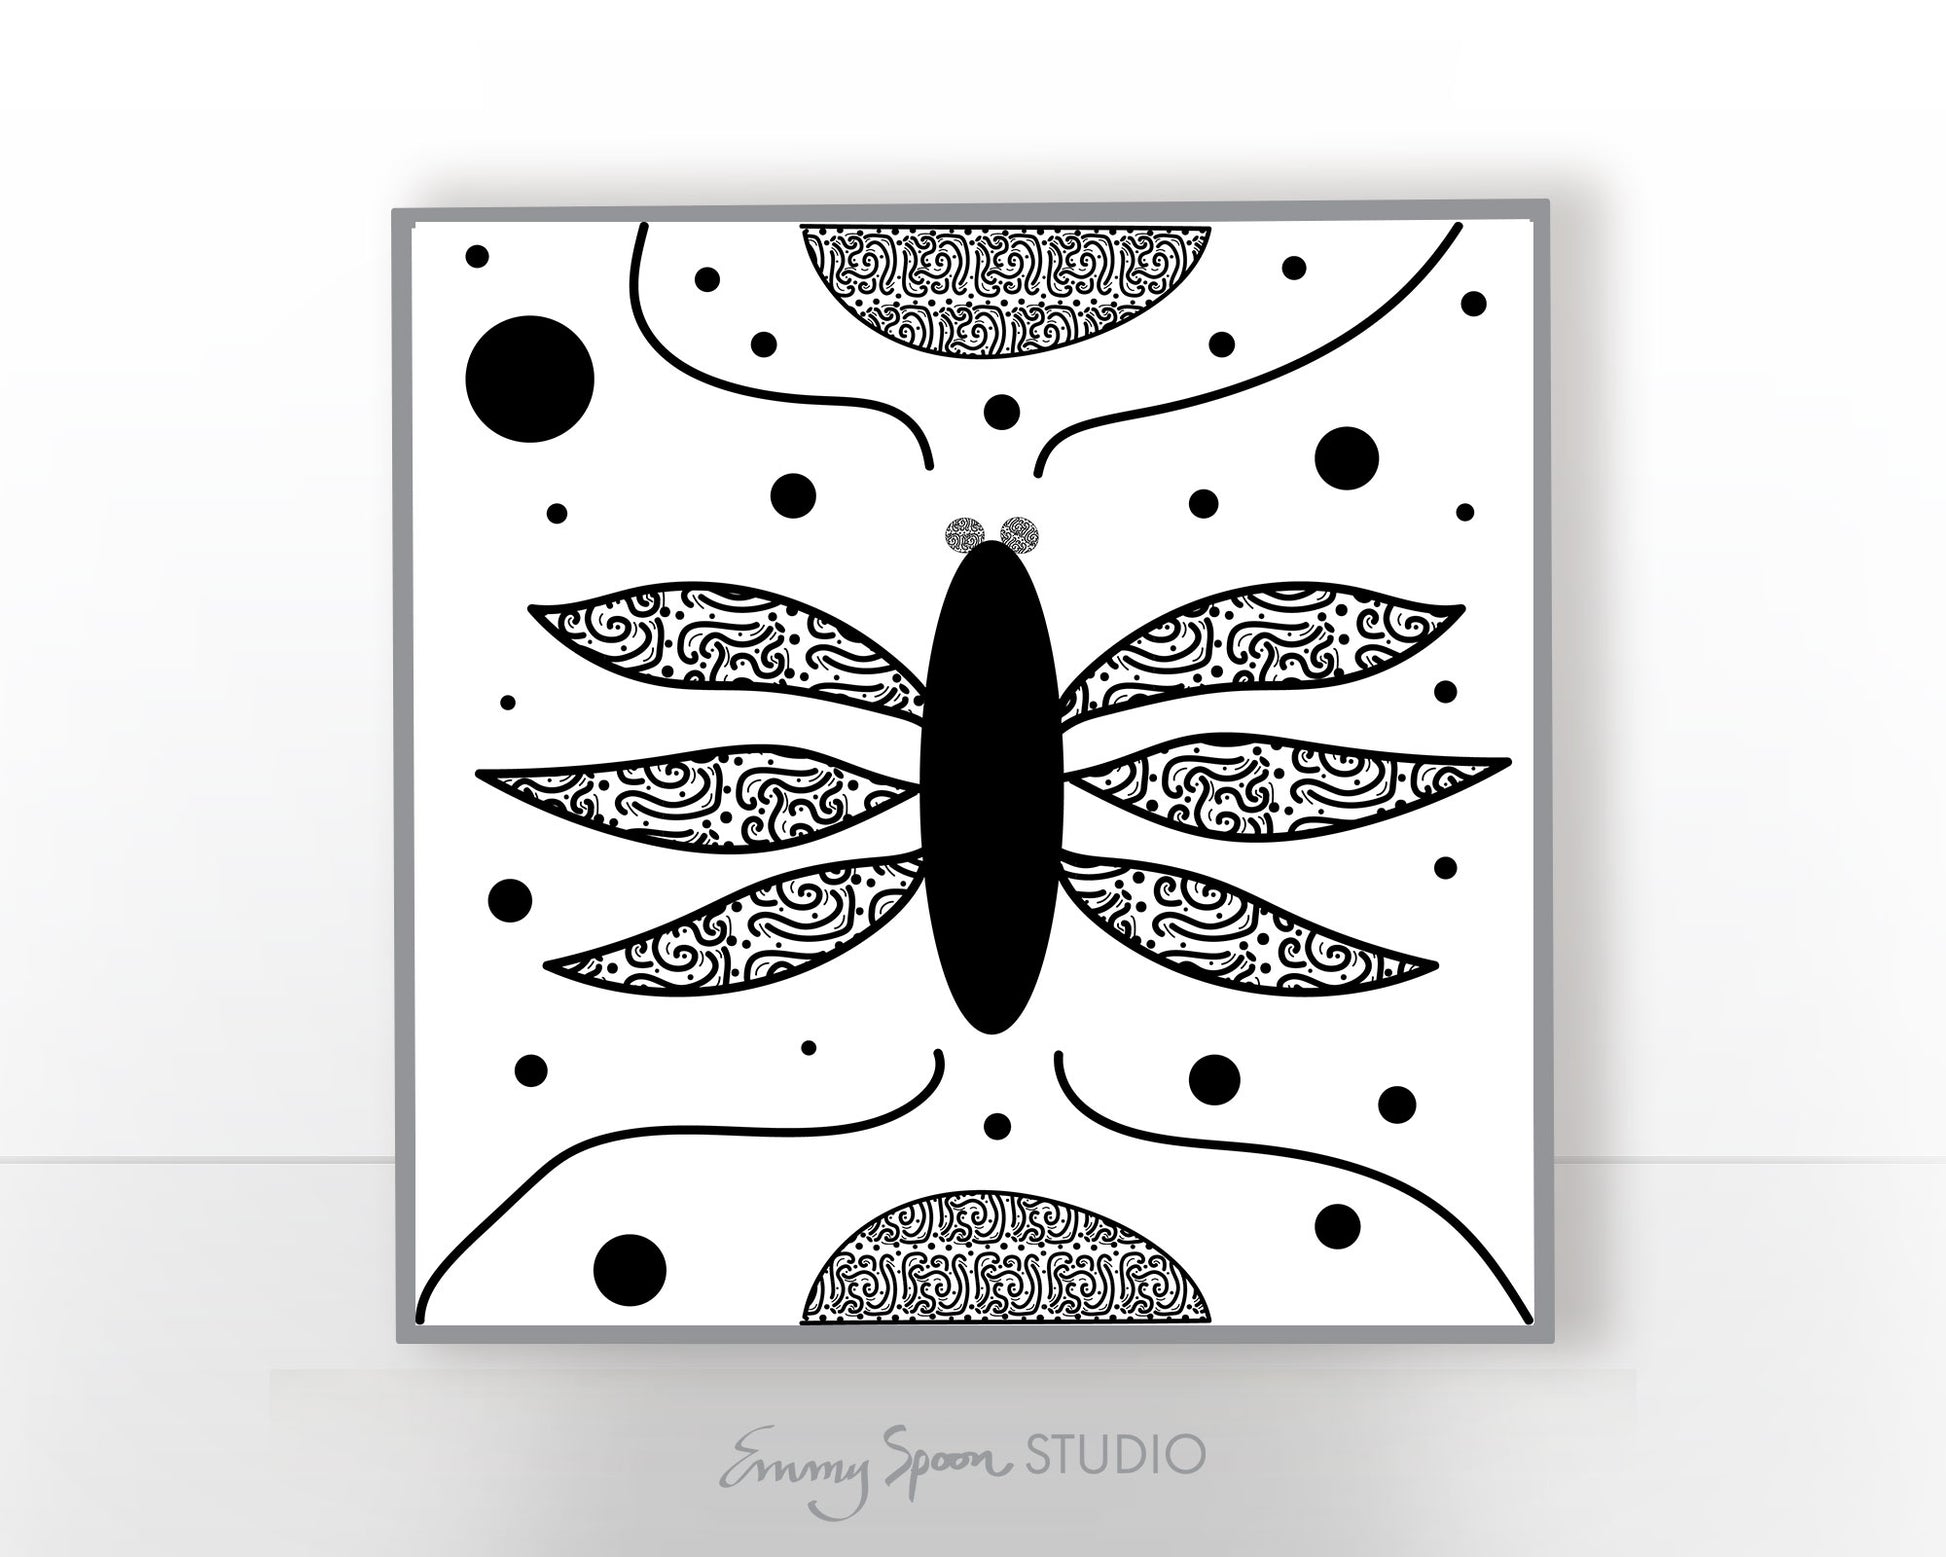 Butterfly Wings (2022) Poster Print by Emmy Spoon